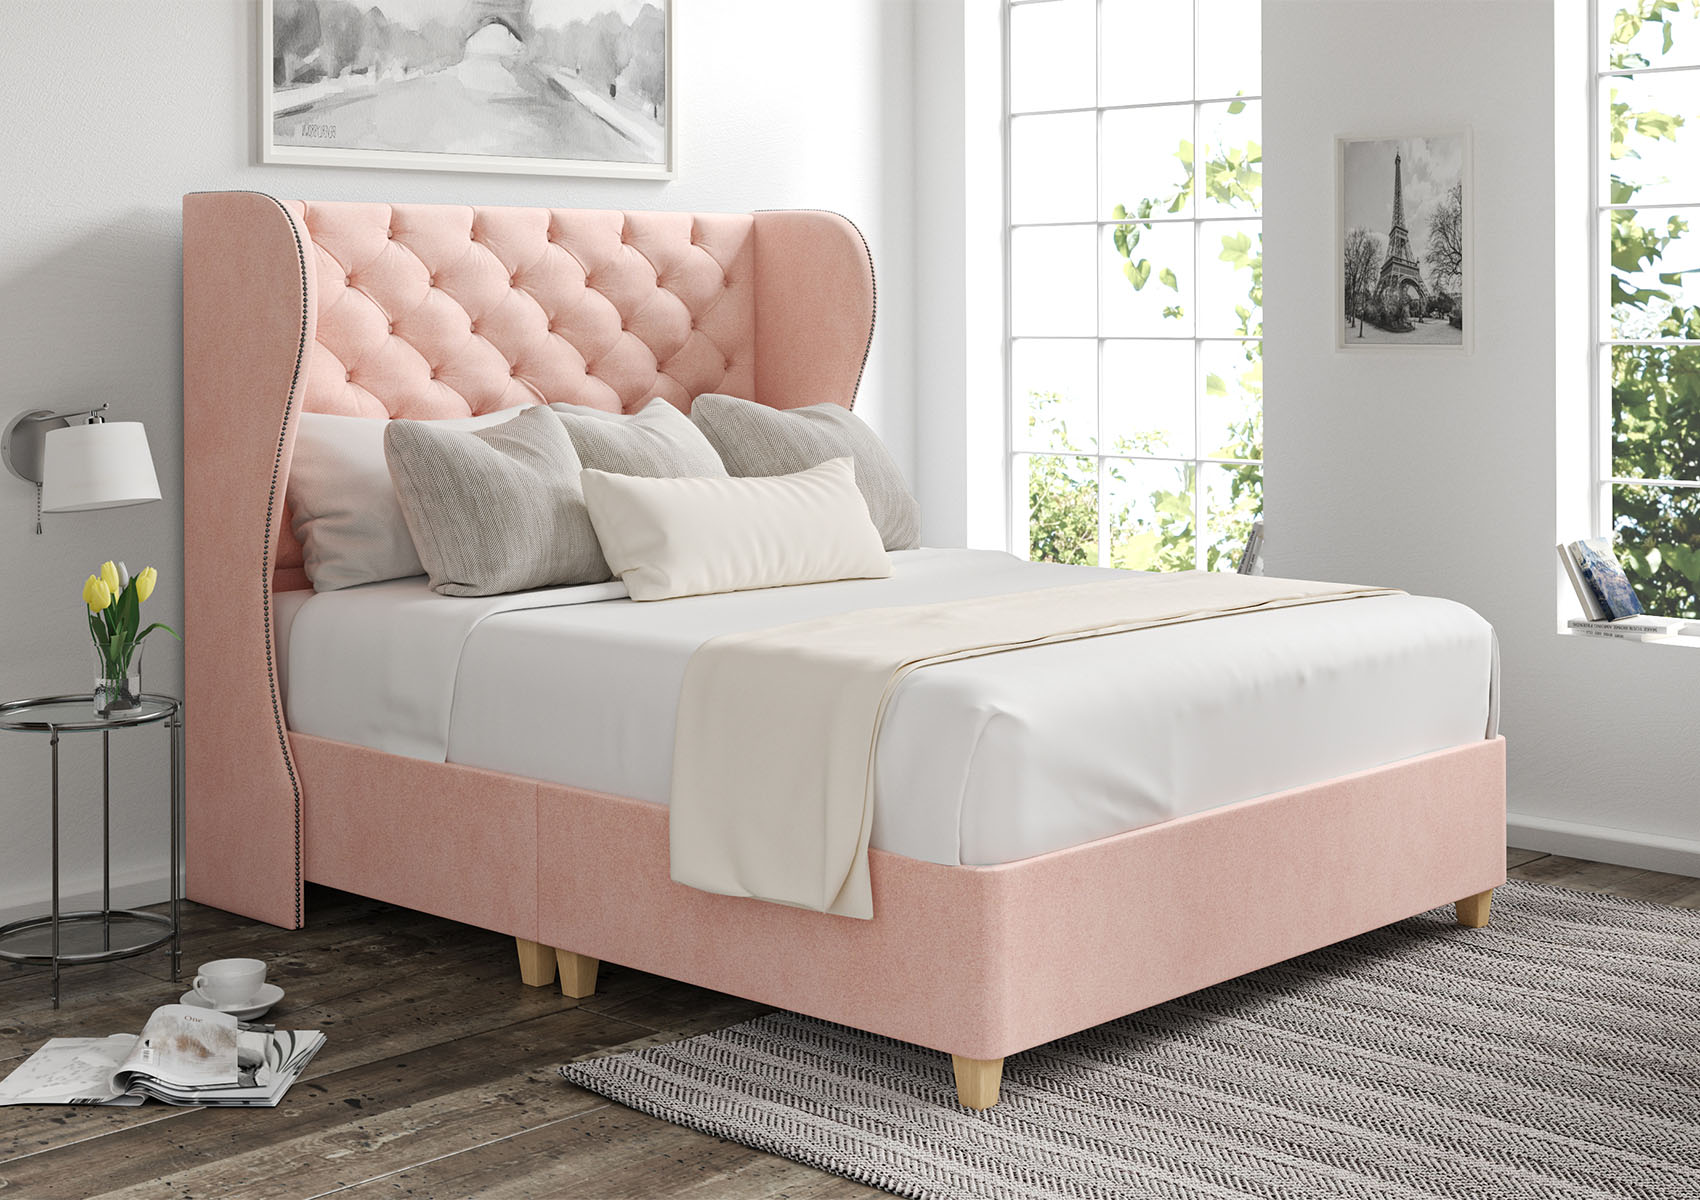 View Miami Carina Parchment Upholstered Single Winged Bed Time4Sleep information